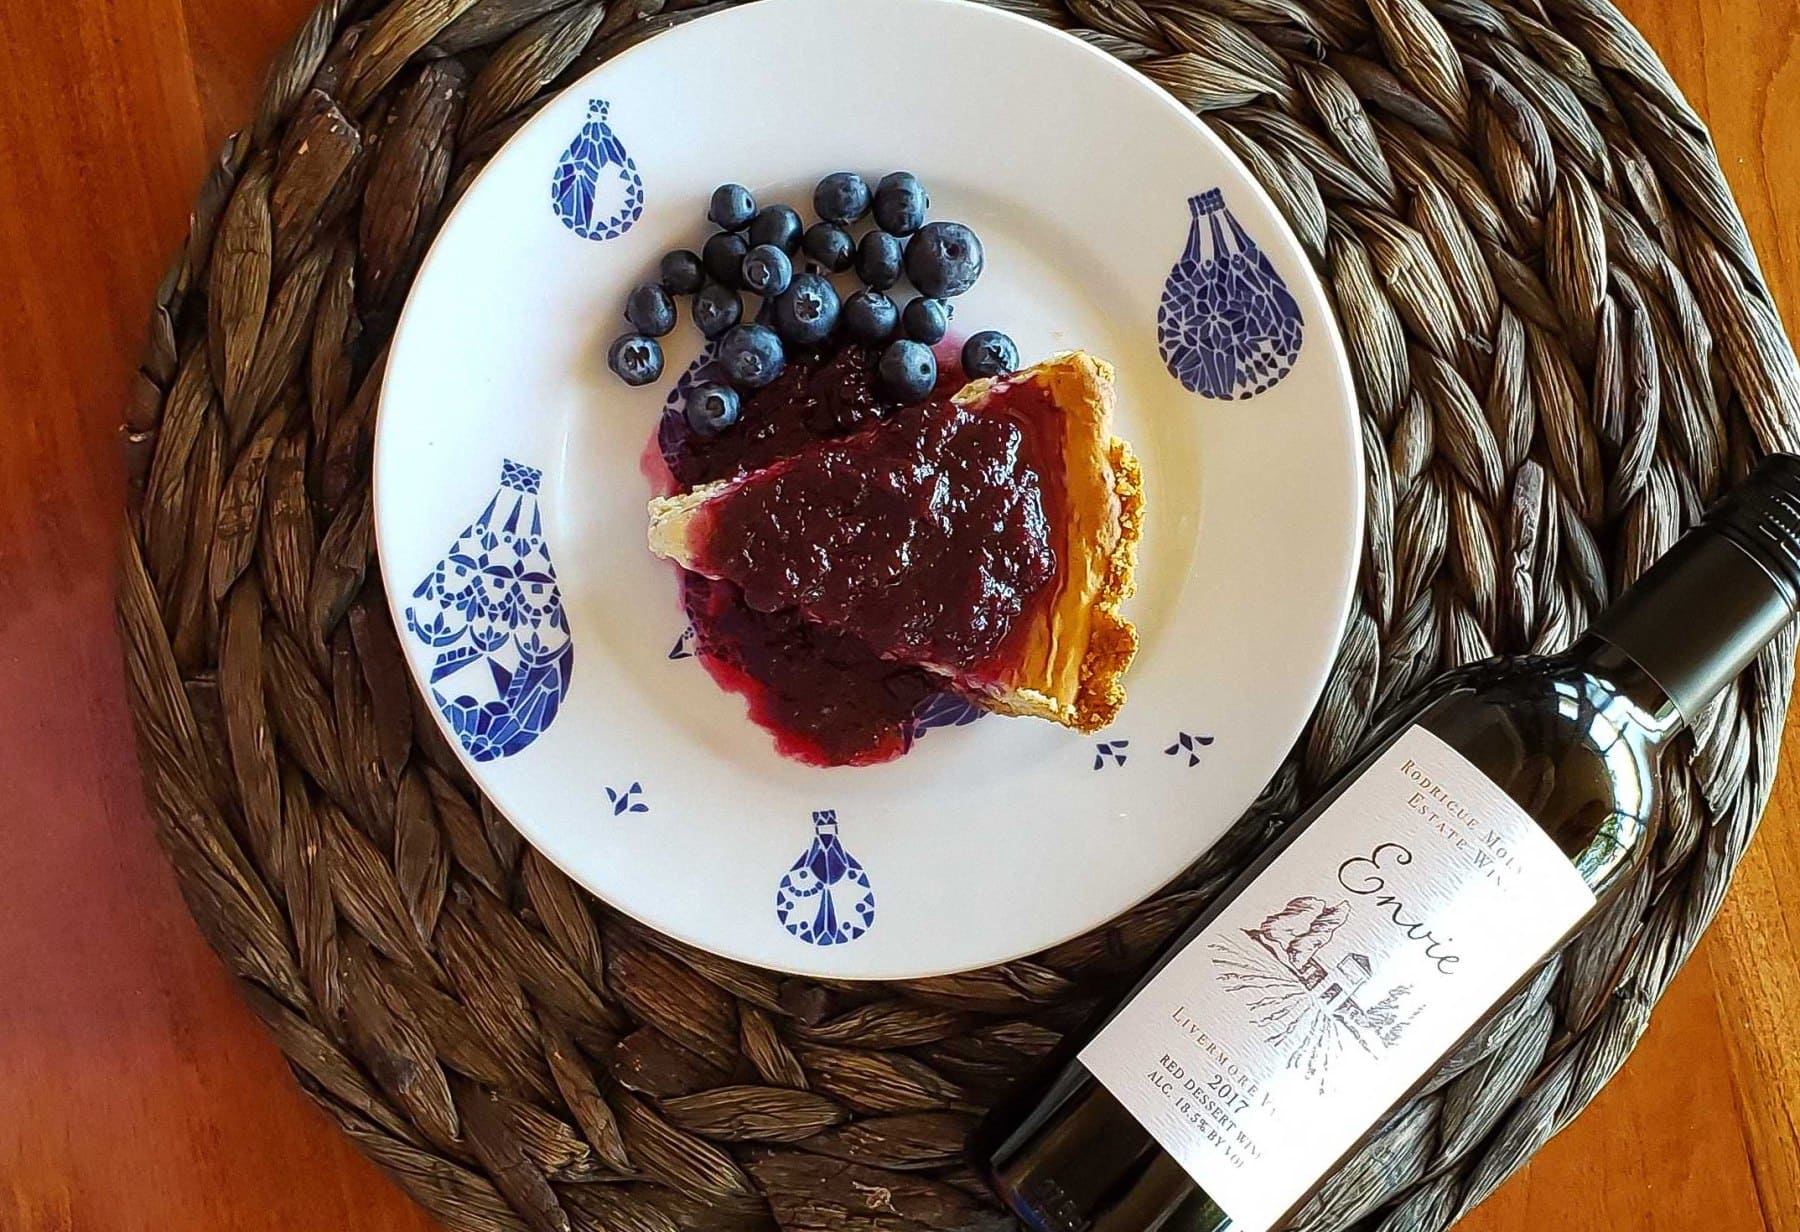 A slice of blueberry and blackberry pie sitting on a wooden table on a blue and white china plate with a bottle of RM 2017 Envie dessert wine next to it